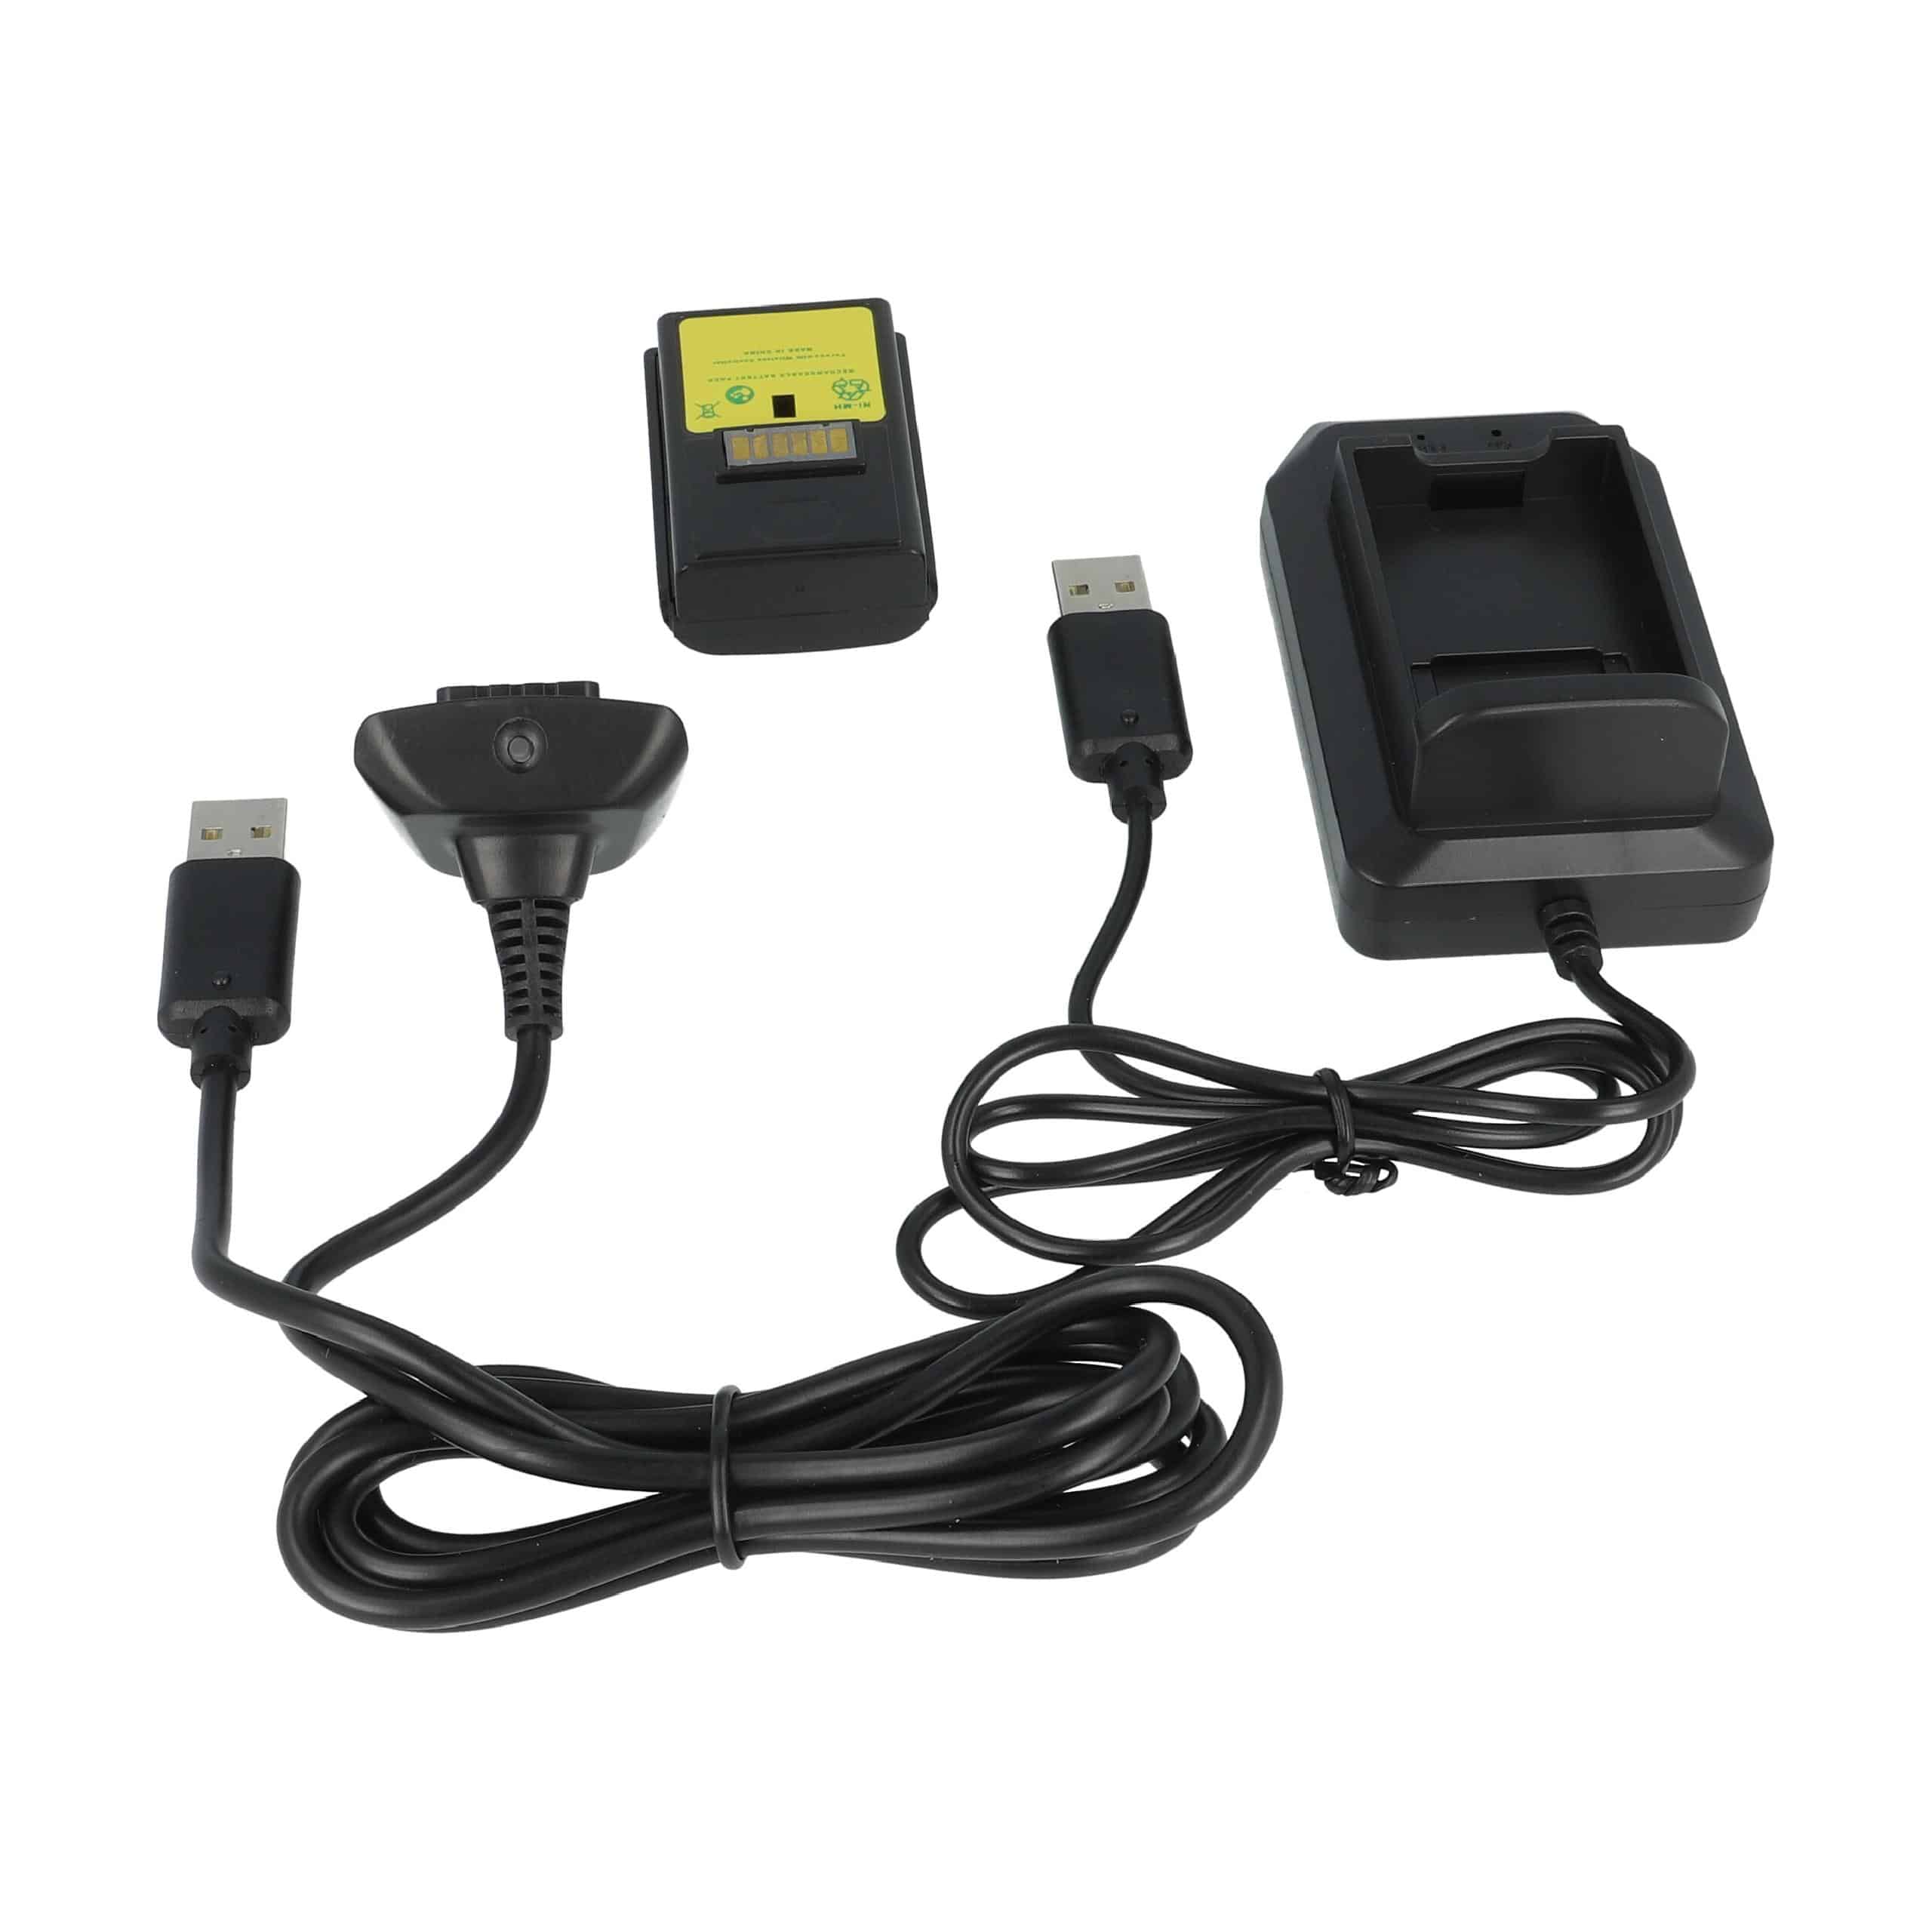 vhbw Play & Charge Kit - 1x battery, 1x charger, 1x charging cable Black